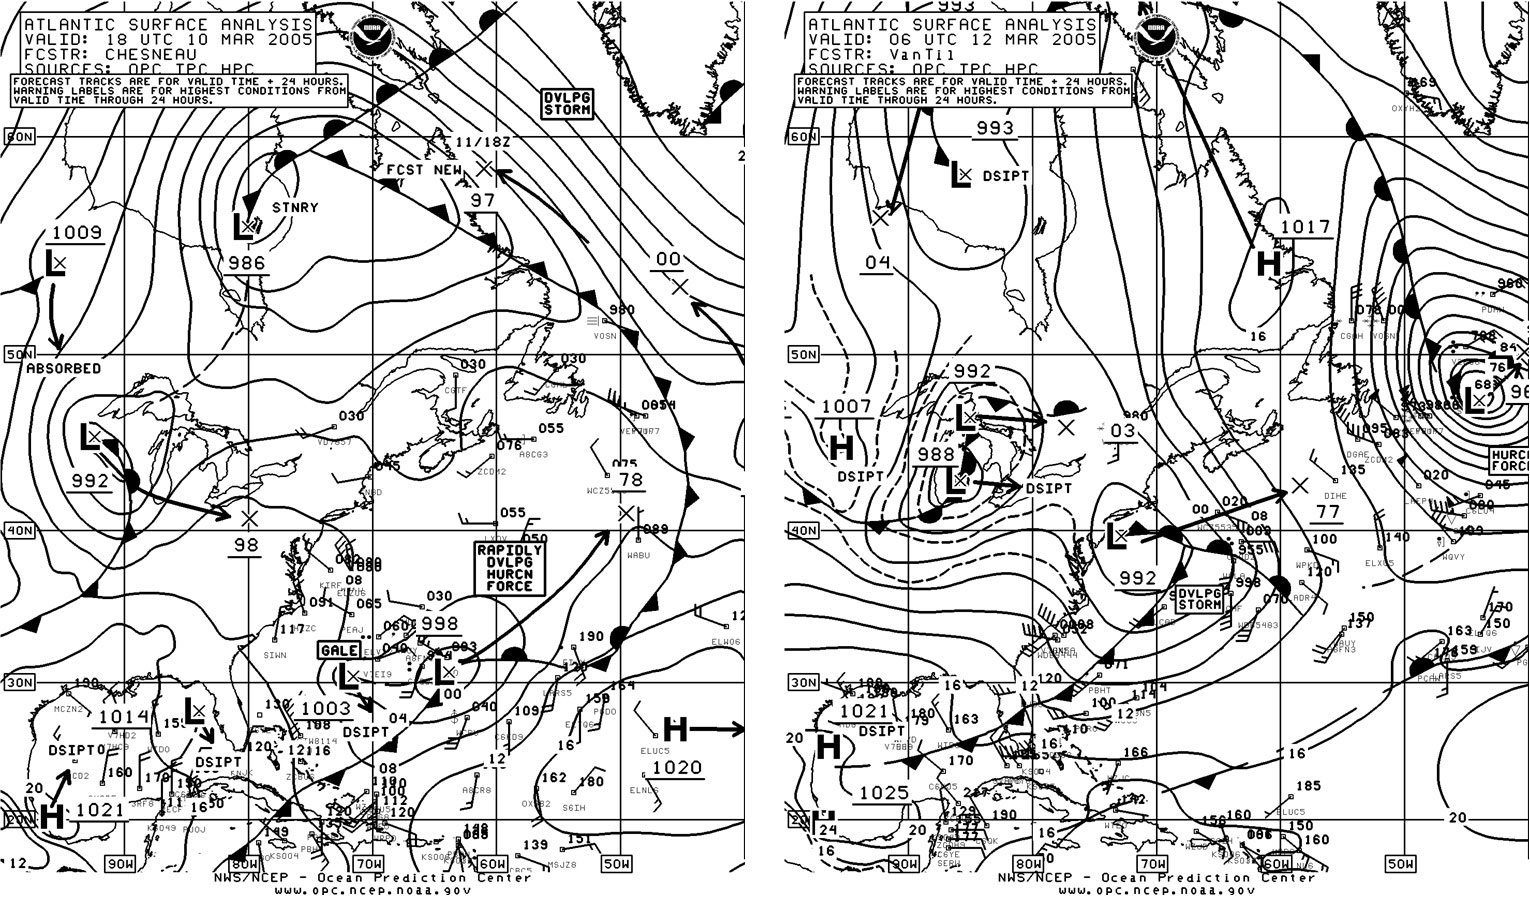 Figure 12. OPC North Atlantic Surface 
Analysis Chart - Click to Enlarge